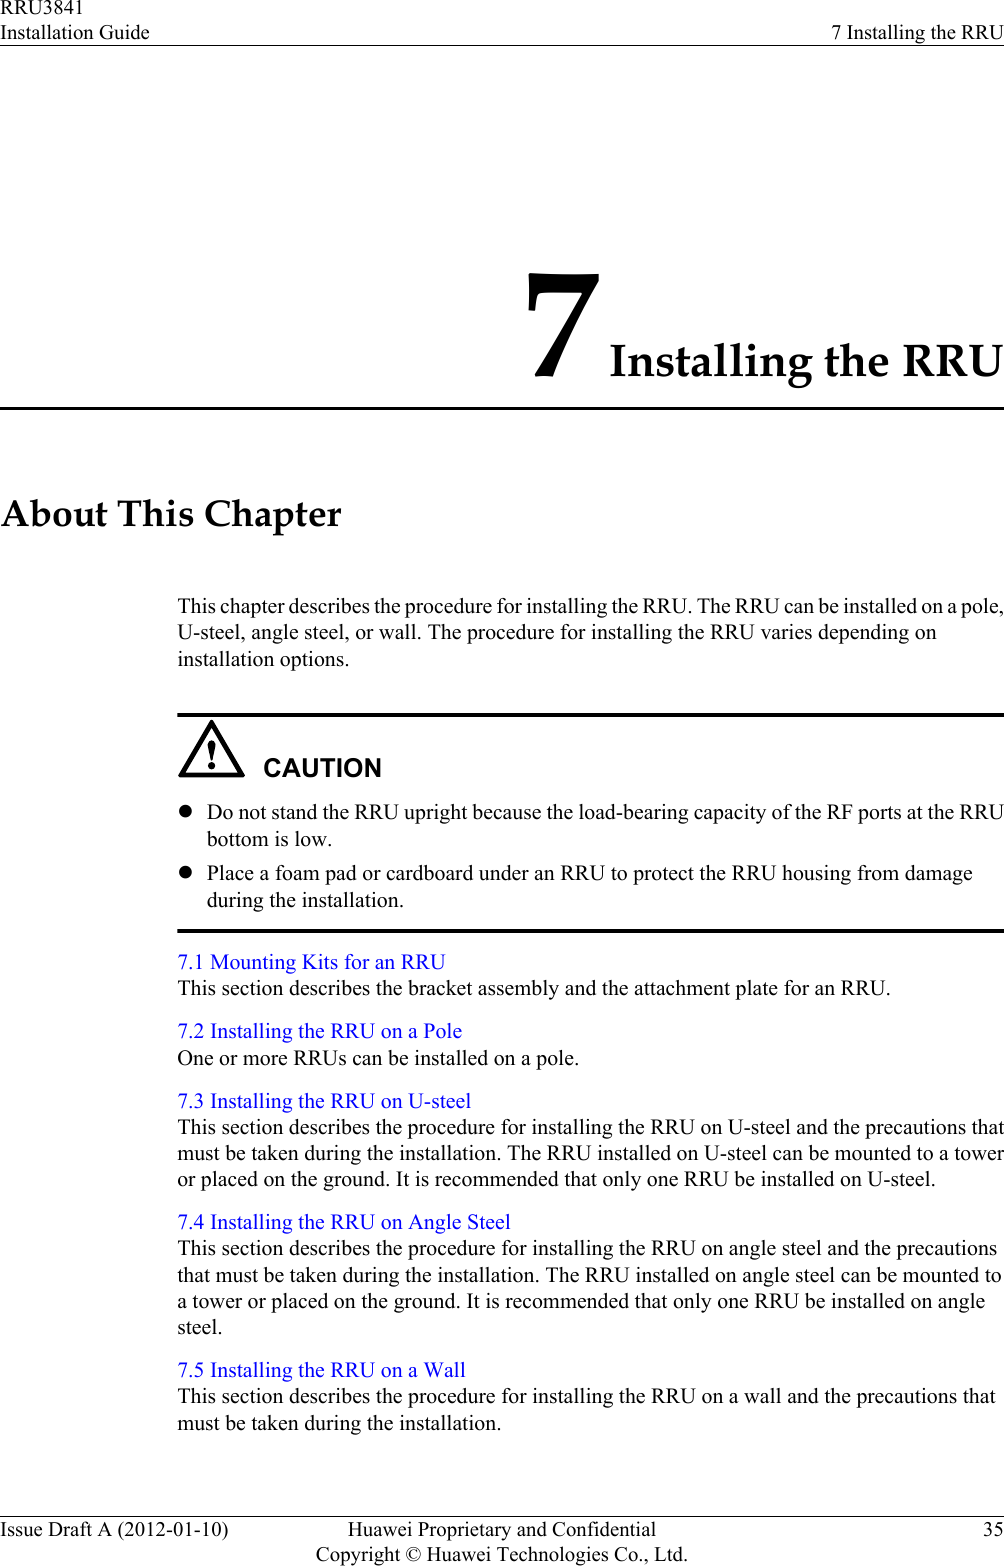 7 Installing the RRUAbout This ChapterThis chapter describes the procedure for installing the RRU. The RRU can be installed on a pole,U-steel, angle steel, or wall. The procedure for installing the RRU varies depending oninstallation options.CAUTIONlDo not stand the RRU upright because the load-bearing capacity of the RF ports at the RRUbottom is low.lPlace a foam pad or cardboard under an RRU to protect the RRU housing from damageduring the installation.7.1 Mounting Kits for an RRUThis section describes the bracket assembly and the attachment plate for an RRU.7.2 Installing the RRU on a PoleOne or more RRUs can be installed on a pole.7.3 Installing the RRU on U-steelThis section describes the procedure for installing the RRU on U-steel and the precautions thatmust be taken during the installation. The RRU installed on U-steel can be mounted to a toweror placed on the ground. It is recommended that only one RRU be installed on U-steel.7.4 Installing the RRU on Angle SteelThis section describes the procedure for installing the RRU on angle steel and the precautionsthat must be taken during the installation. The RRU installed on angle steel can be mounted toa tower or placed on the ground. It is recommended that only one RRU be installed on anglesteel.7.5 Installing the RRU on a WallThis section describes the procedure for installing the RRU on a wall and the precautions thatmust be taken during the installation.RRU3841Installation Guide 7 Installing the RRUIssue Draft A (2012-01-10) Huawei Proprietary and ConfidentialCopyright © Huawei Technologies Co., Ltd.35